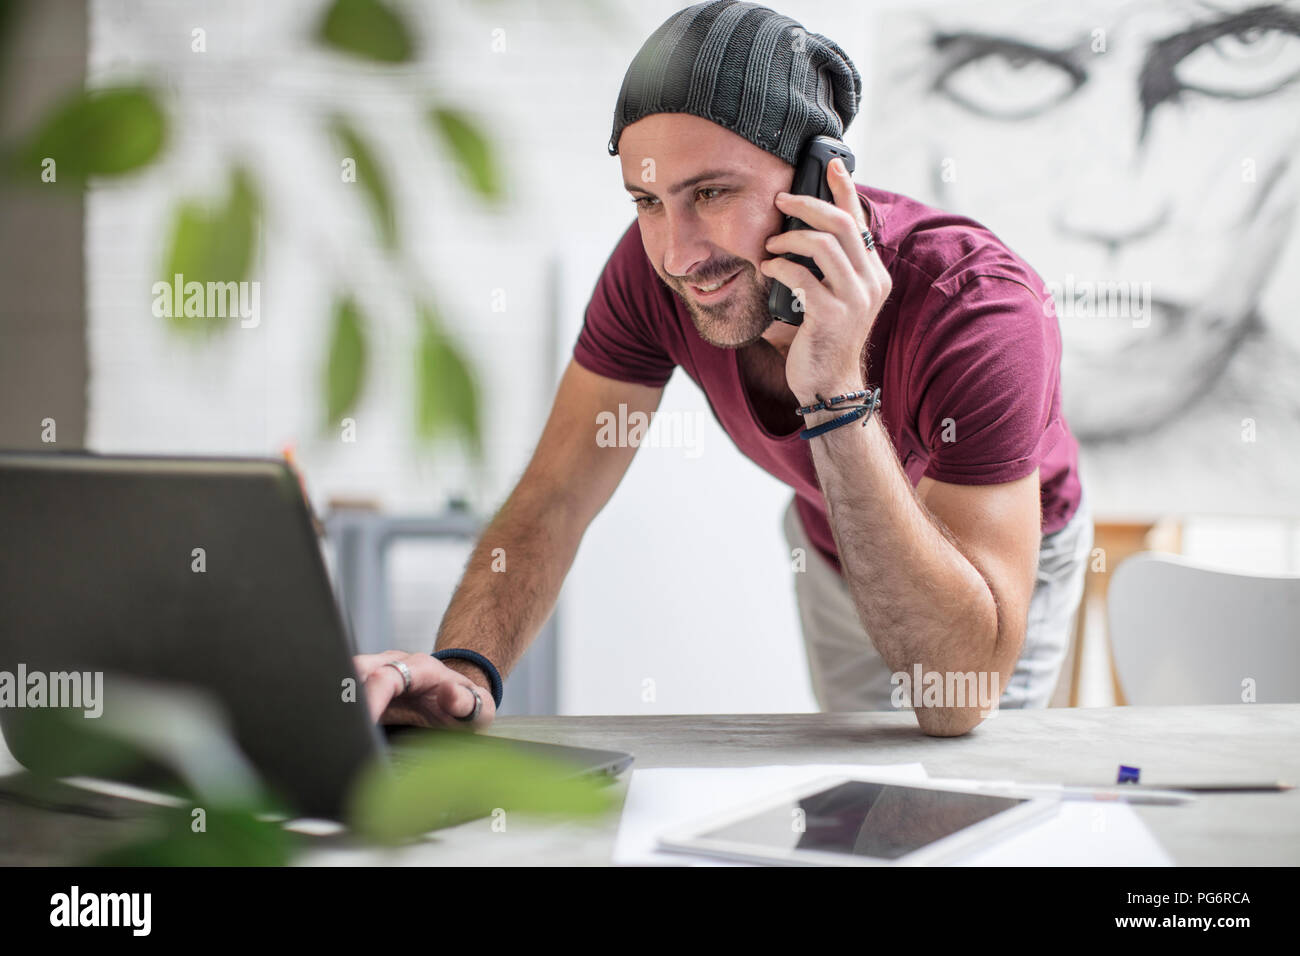 Artist using laptop and cell phone in studio Stock Photo